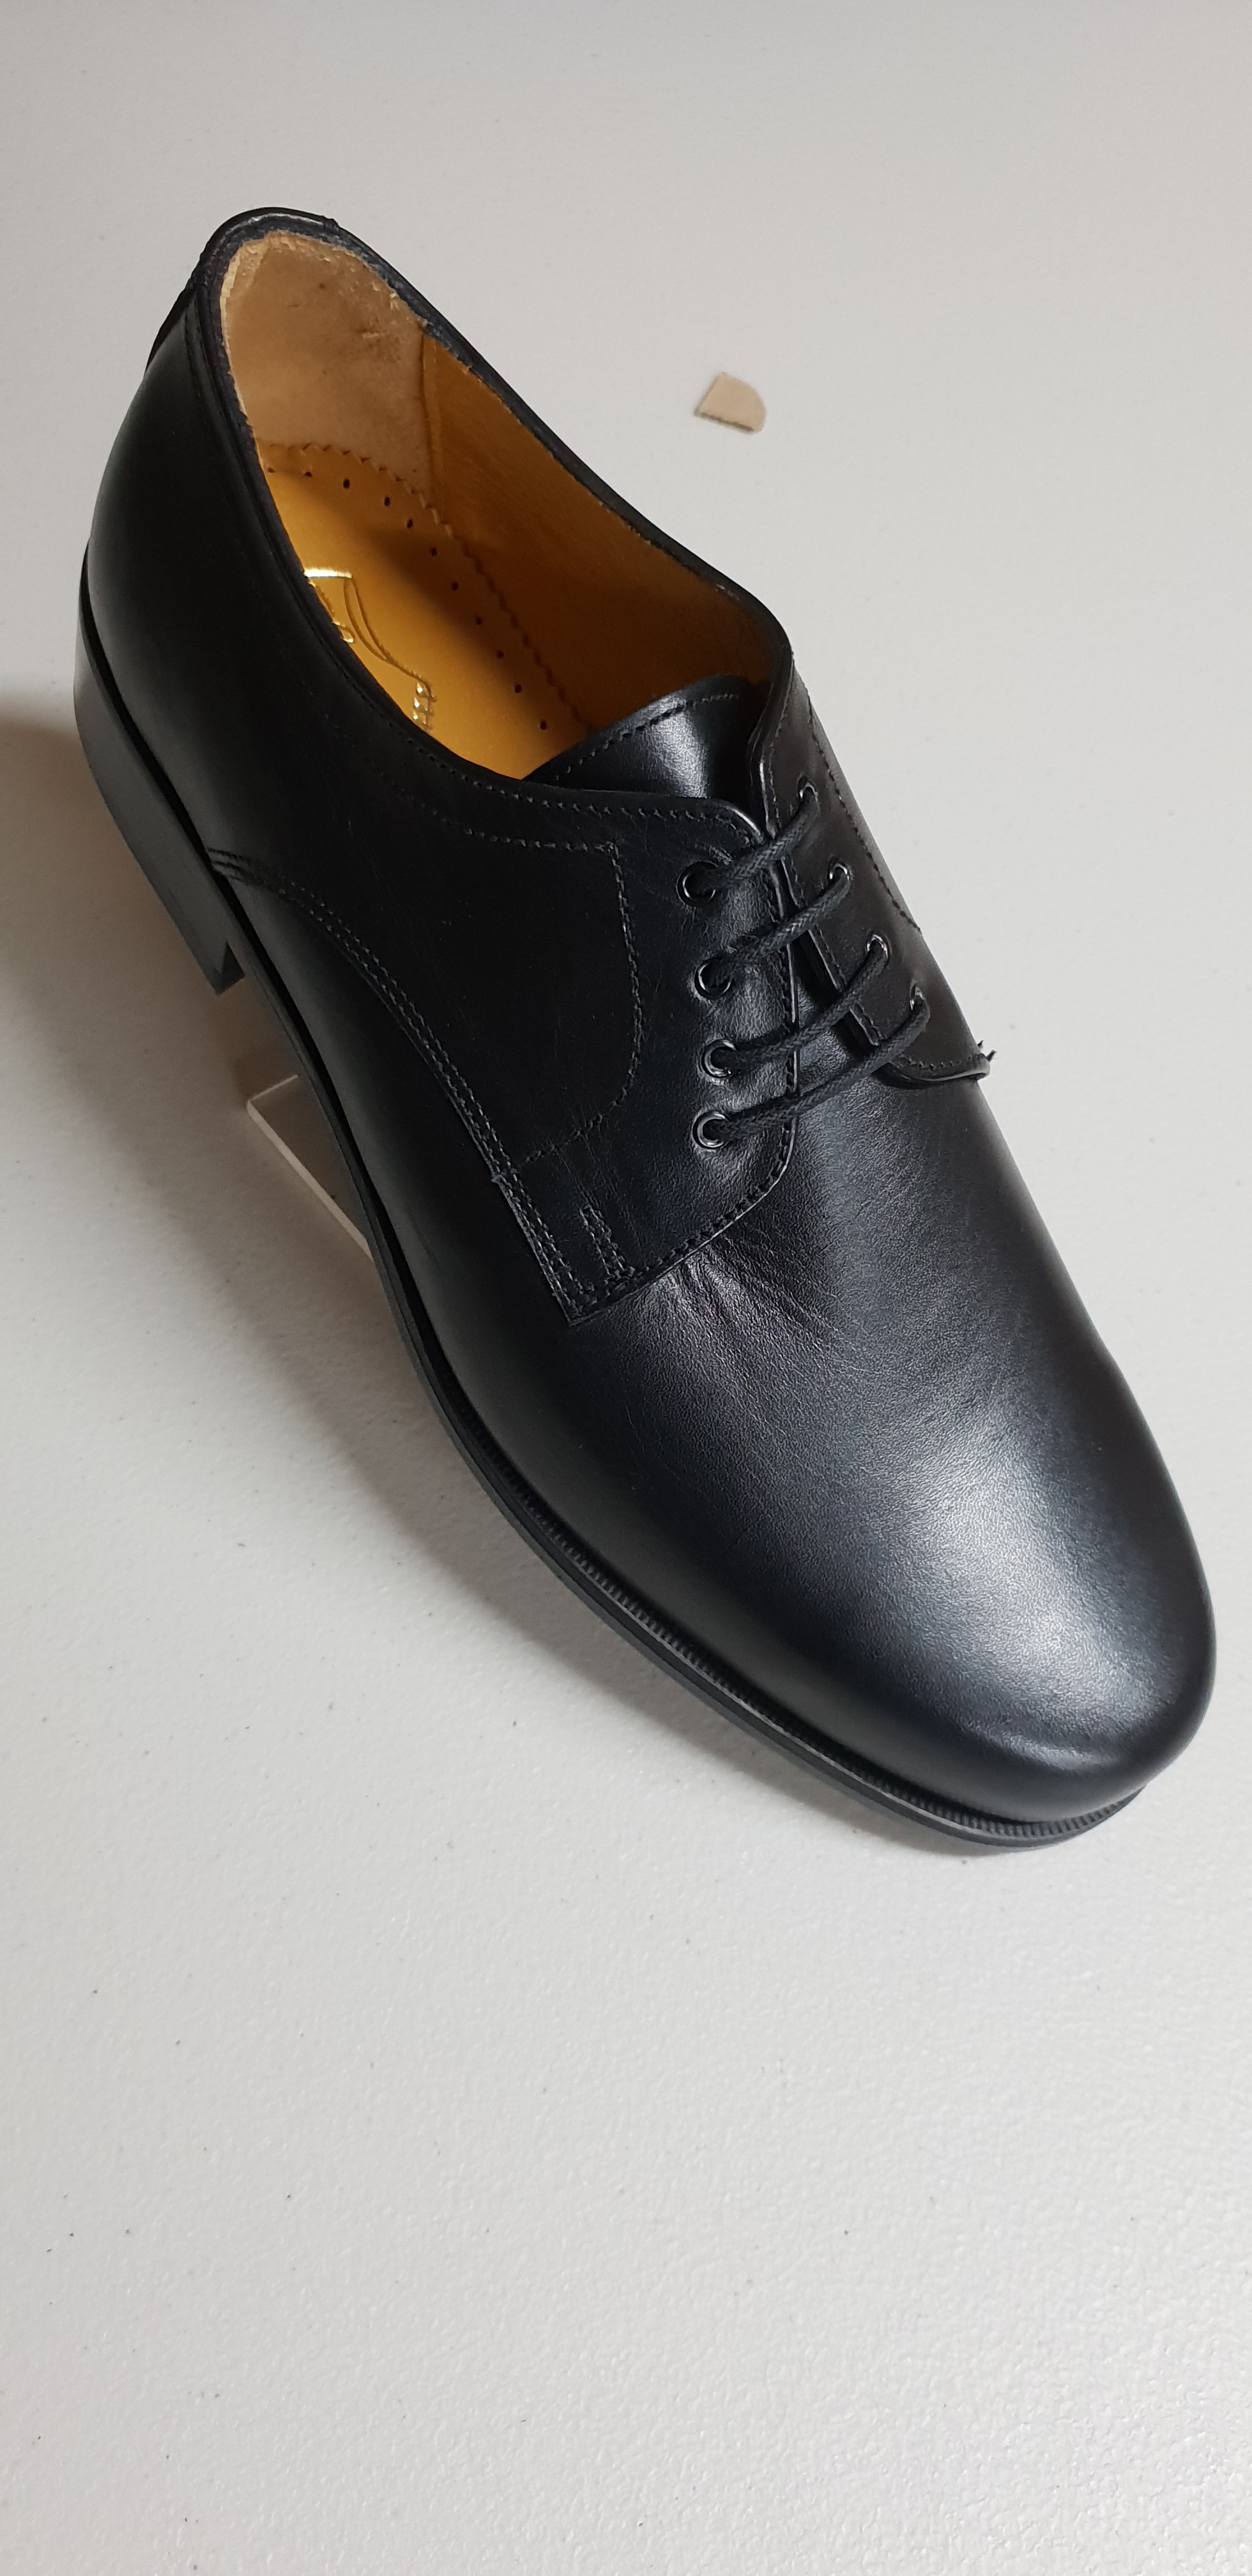 Handmade Mens Shoes by Lester Shoes